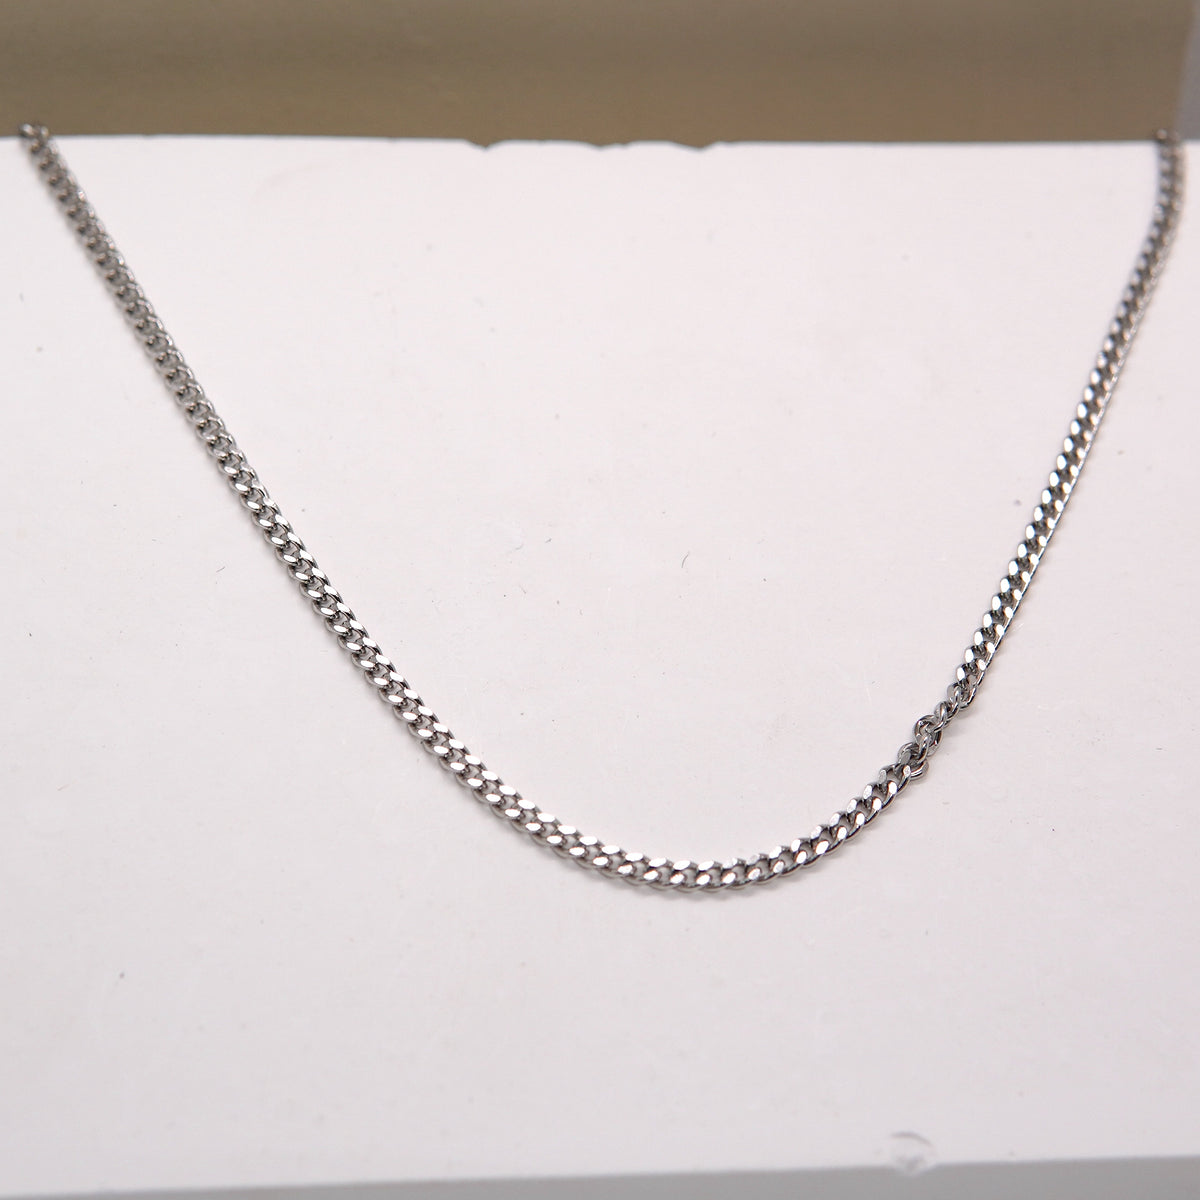 NECKLACE - INTERTWINE CHAIN